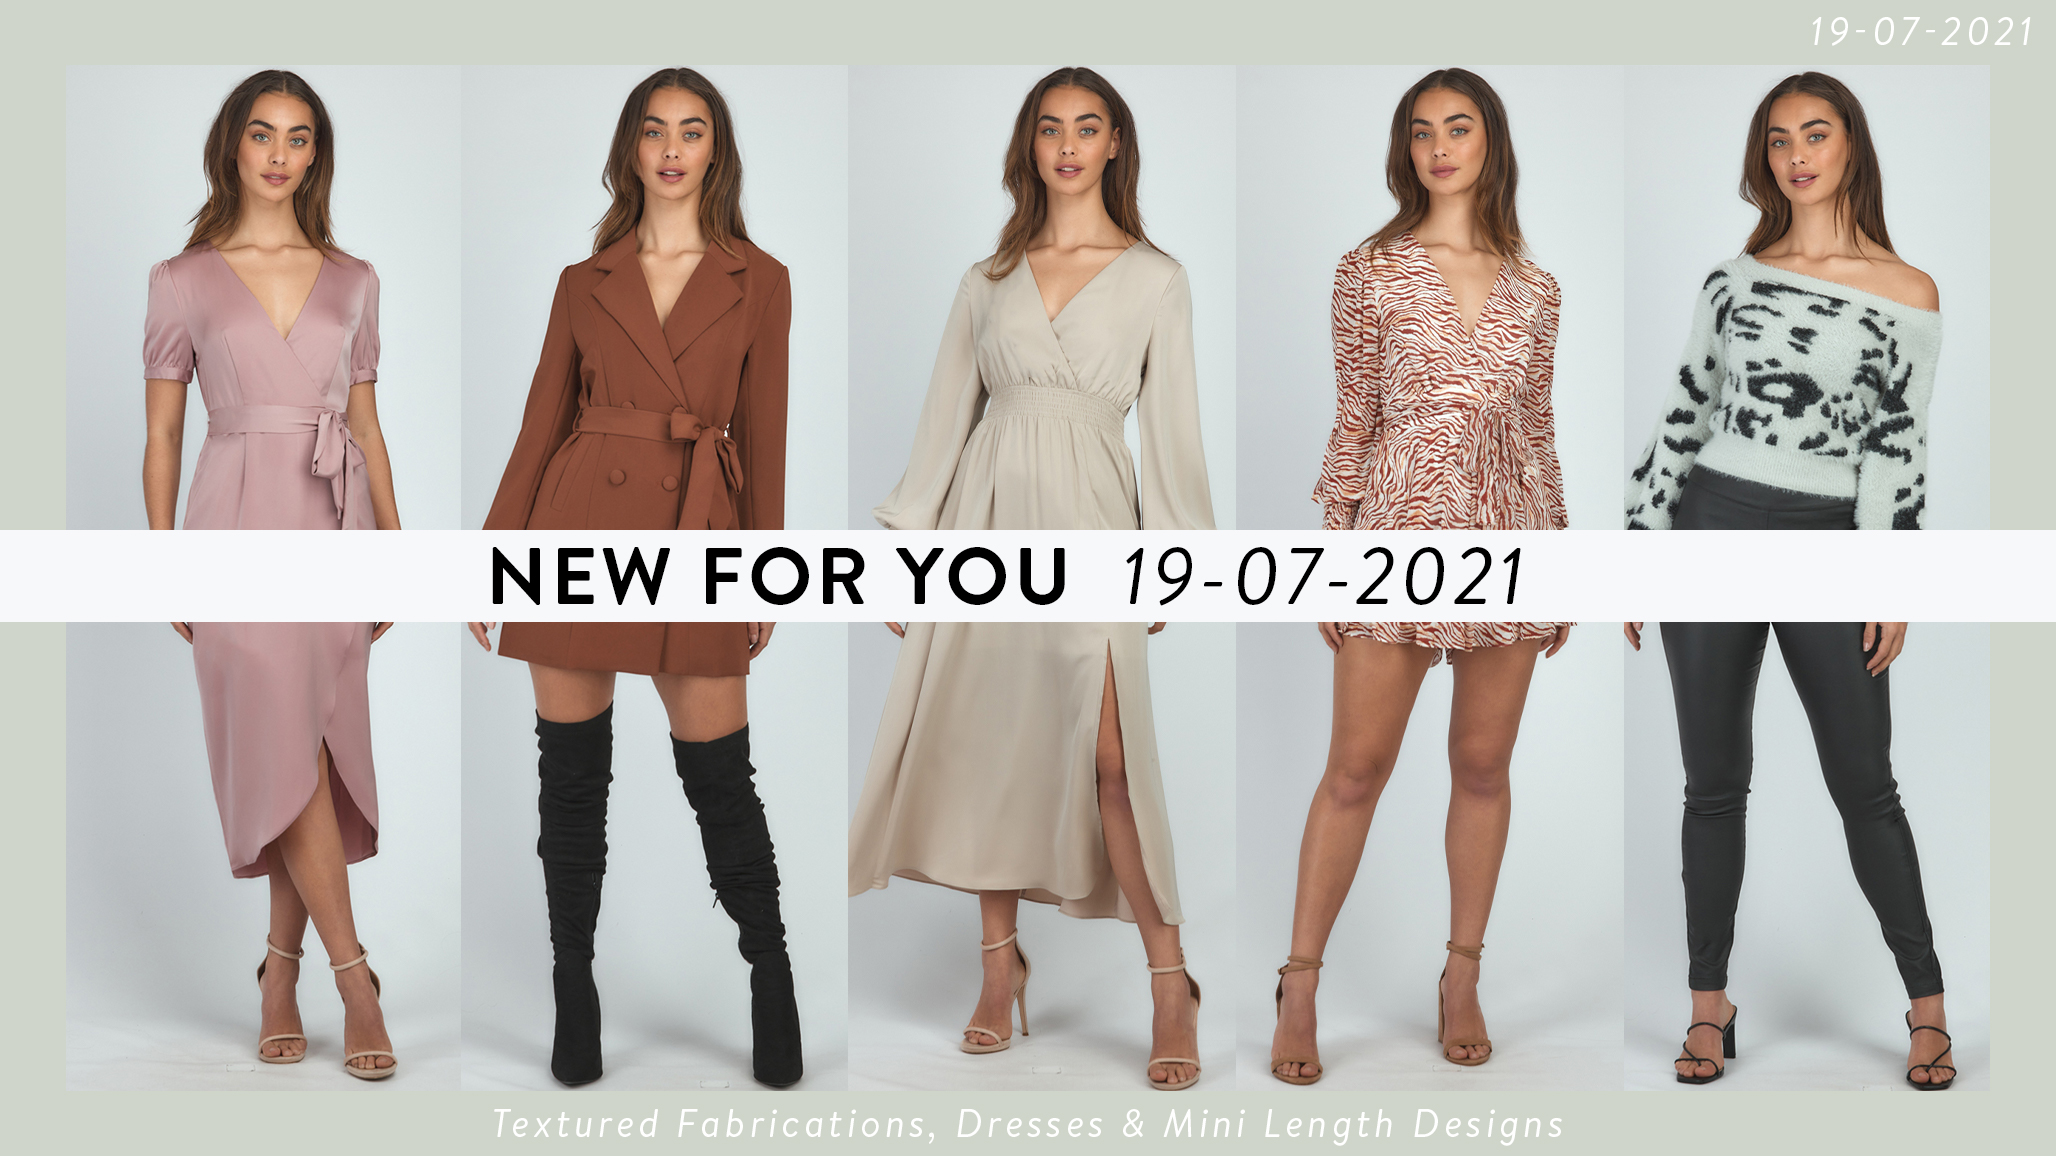 NEW FOR YOU 19.07.2021